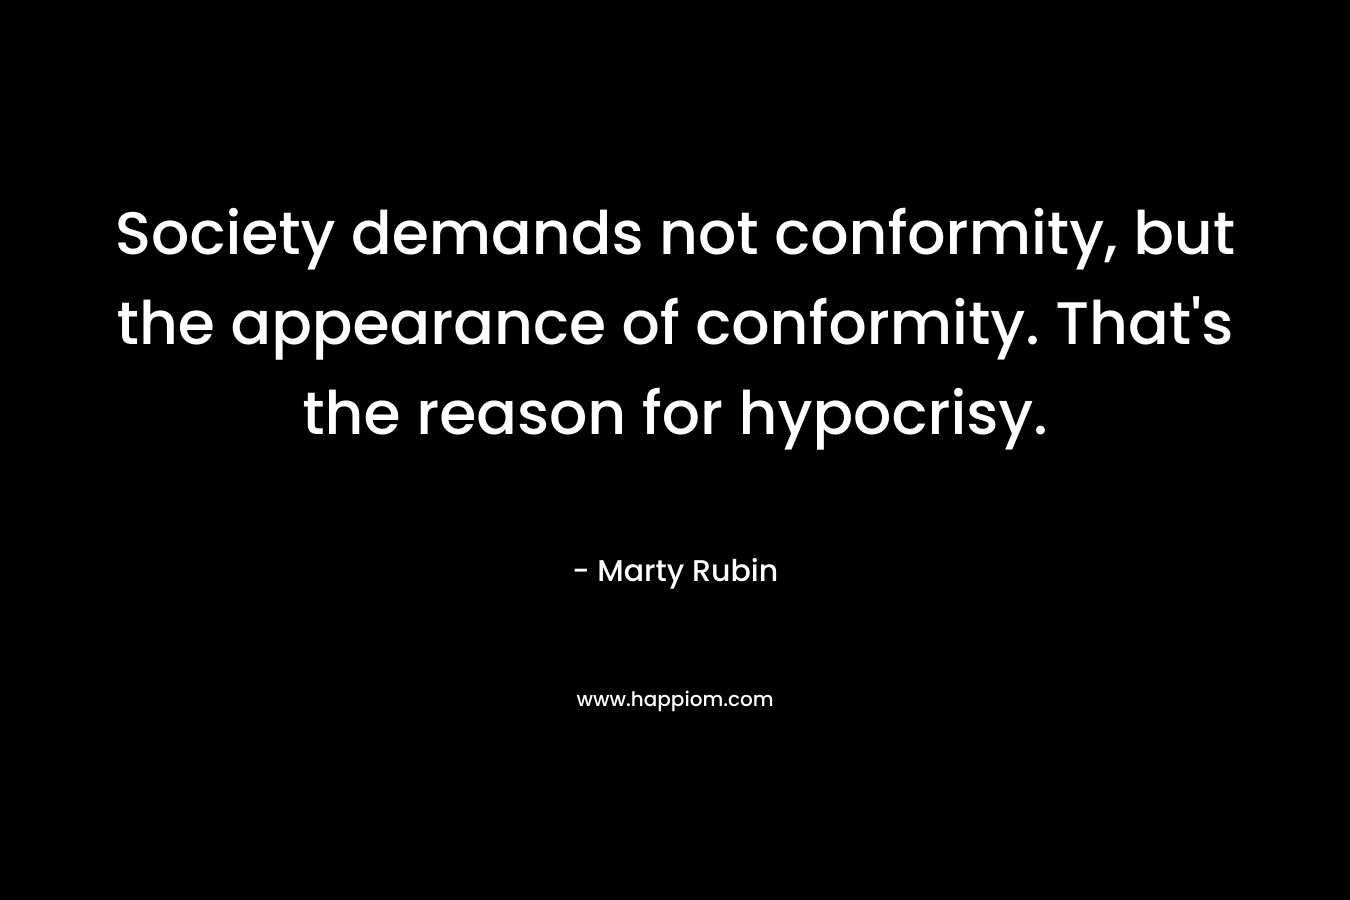 Society demands not conformity, but the appearance of conformity. That's the reason for hypocrisy.